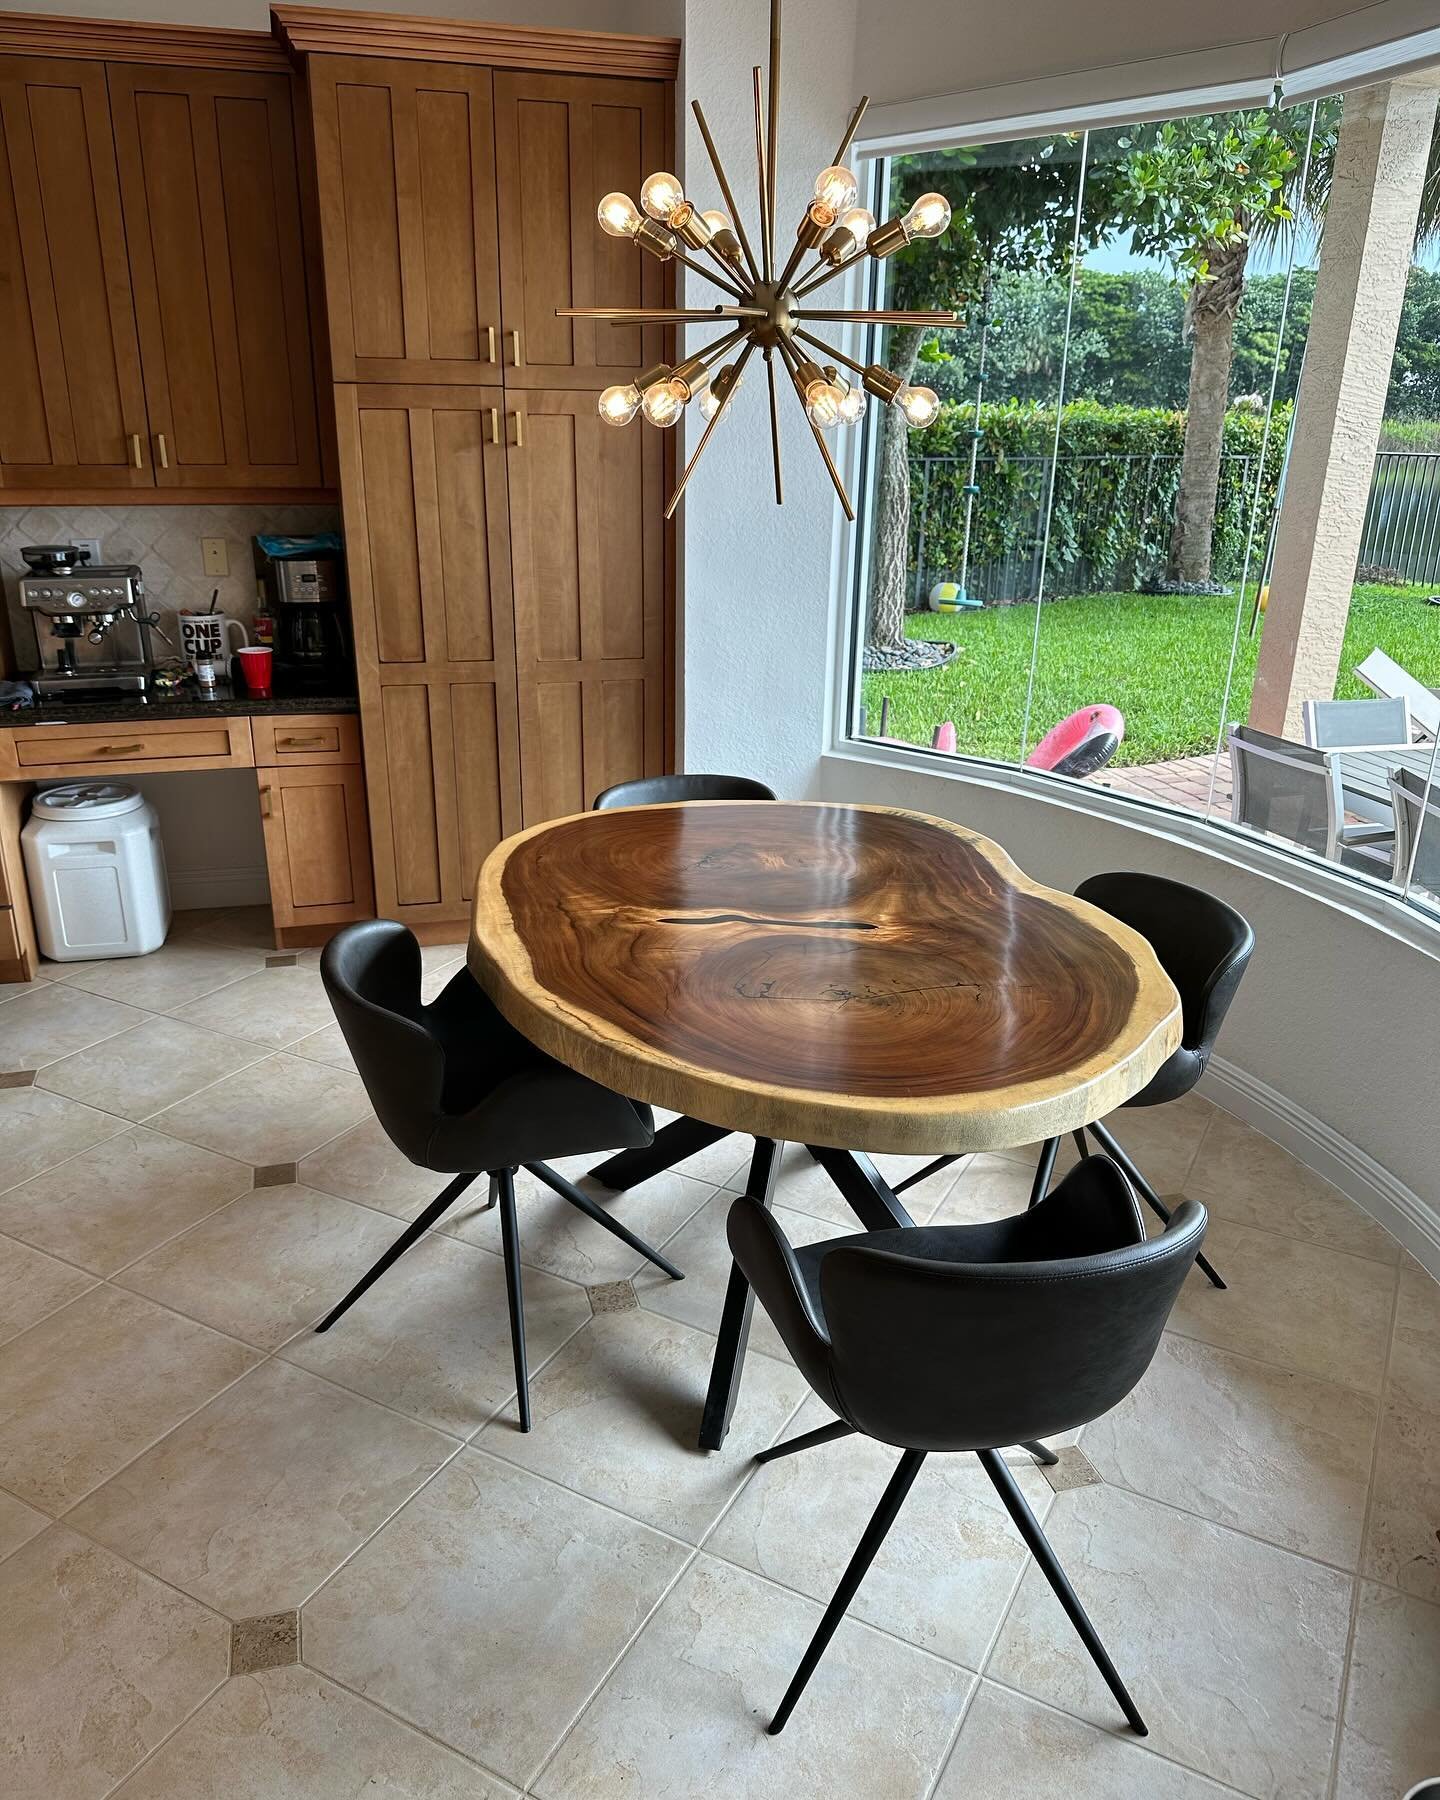 Why choose a round dining table? It is a perfect blend of style, function and connection. Round tables offer a space for easy conversation and togetherness to create memories. 

#roundtable #circletable #liveedge #crosscut #wood #wooddesign #diningro